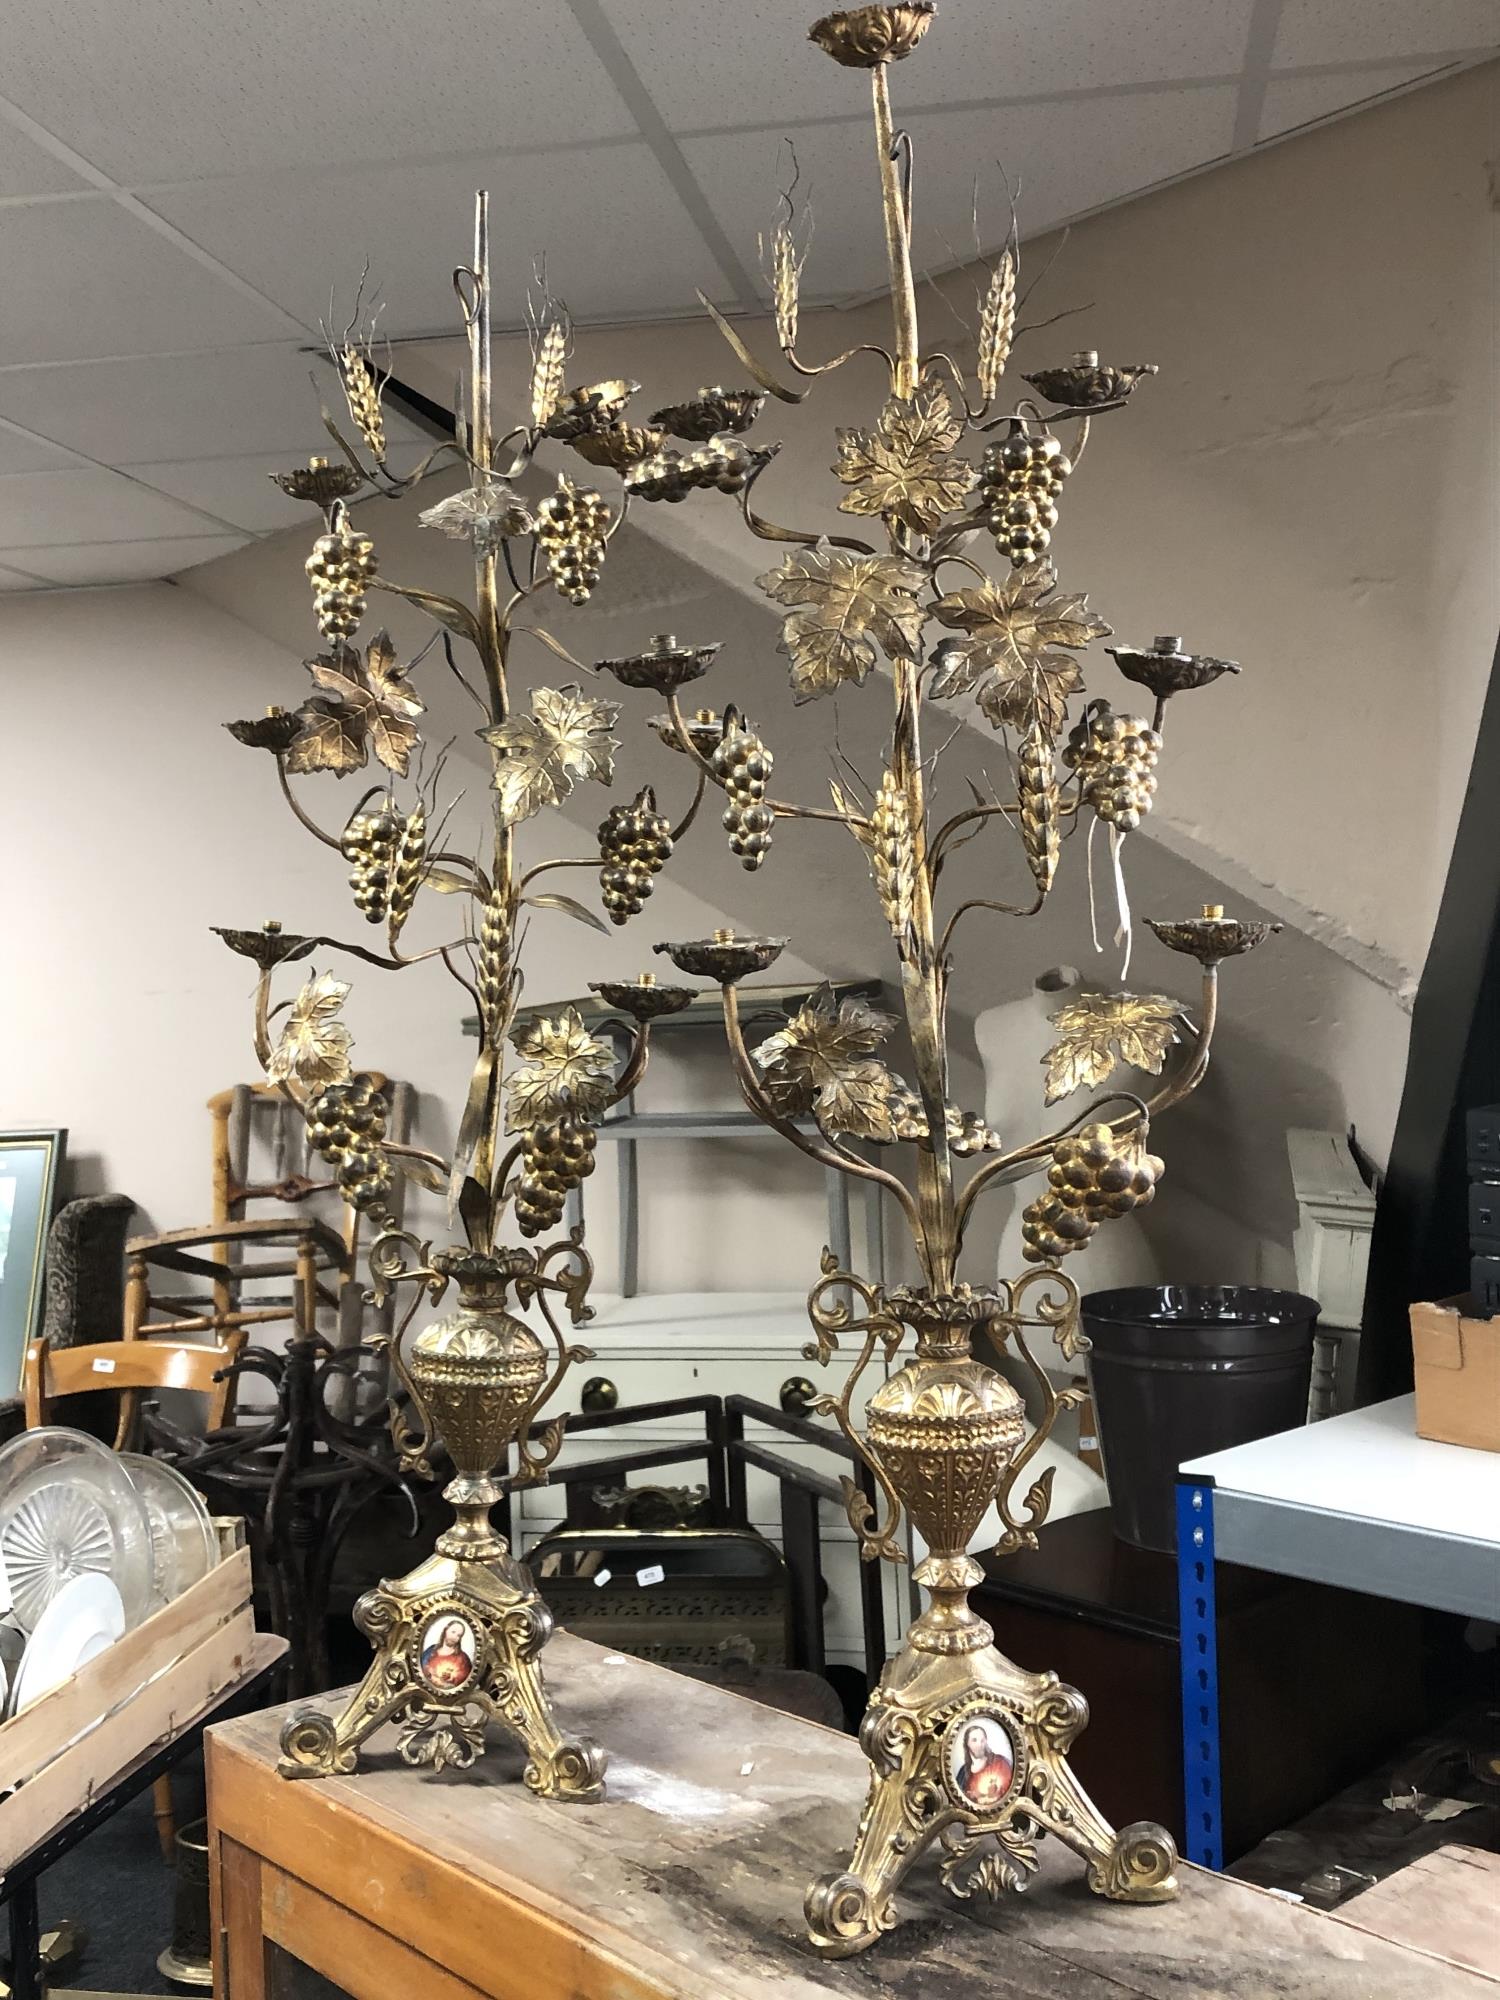 A pair of antique style metal table lights